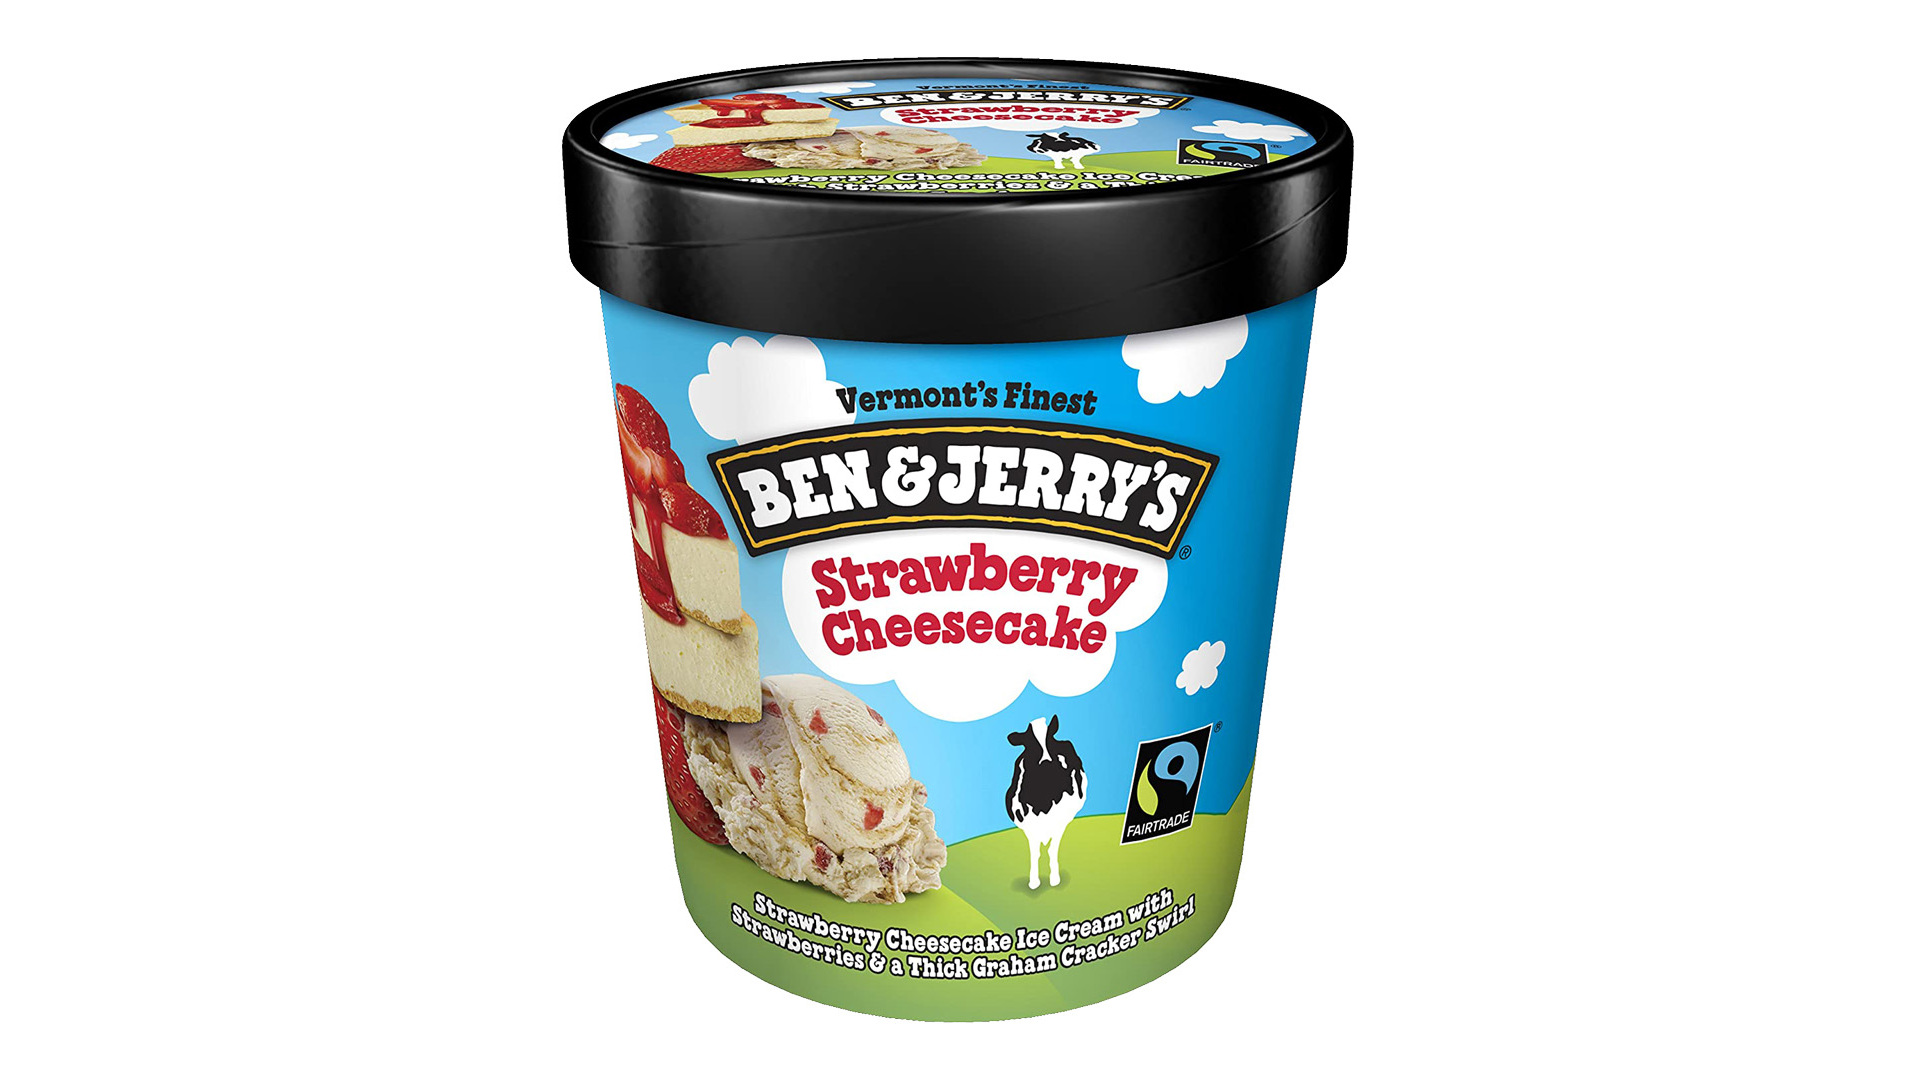 Ben & Jerry's Strawberry Cheesecake 500ml - Chicken Burger Delivery in Stratford Marsh E15